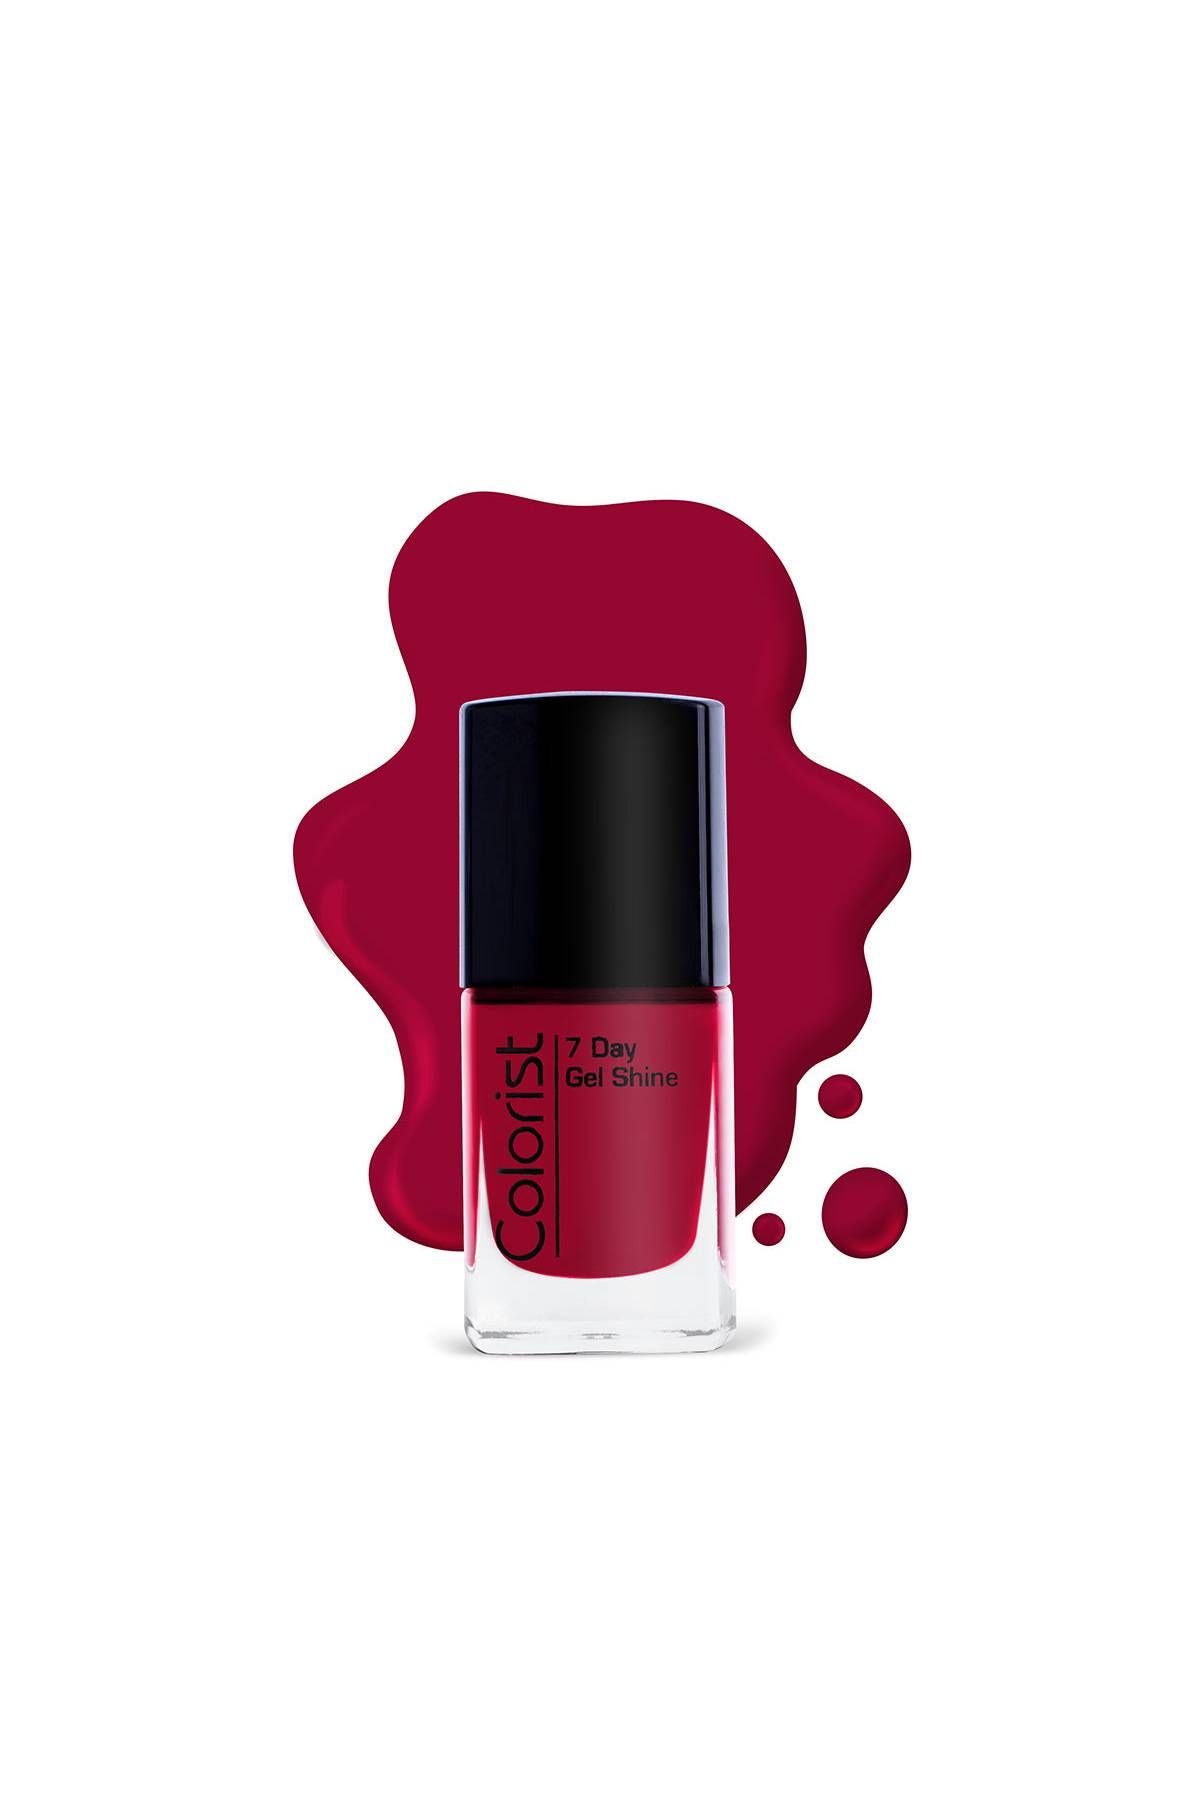 ST London - Colorist Nail Paint - ST007 - Hot Red